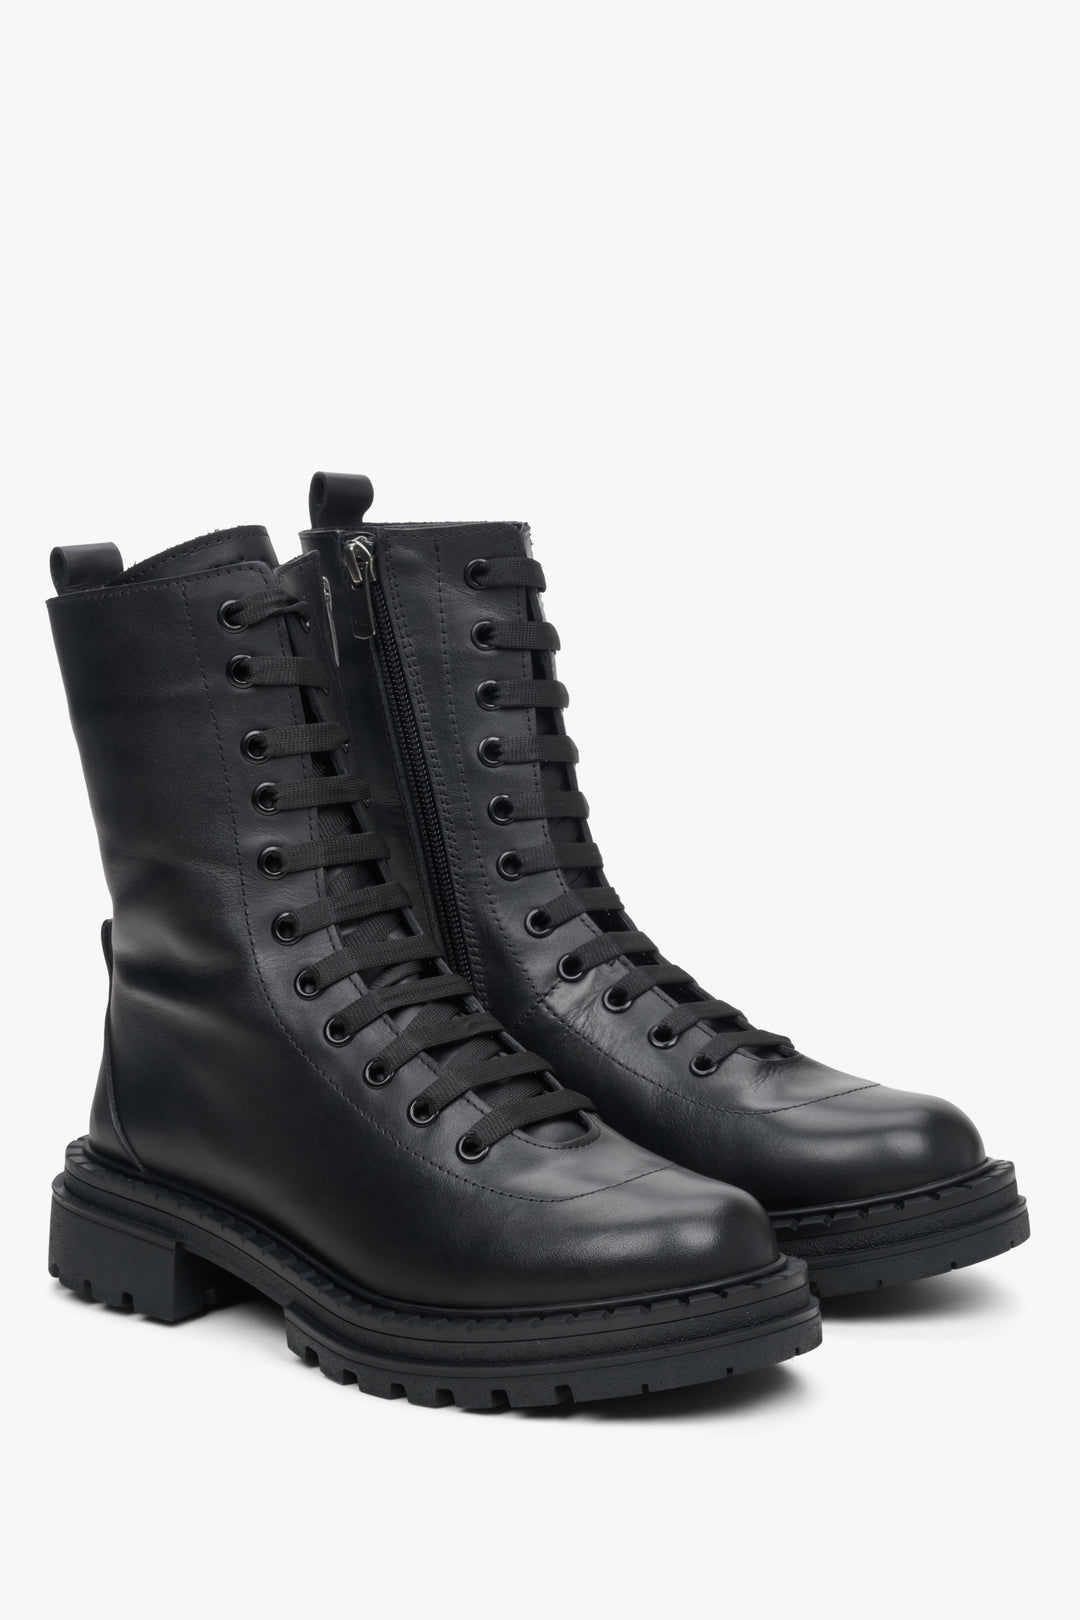 Women's black leather ankle boots for fall by Estro.